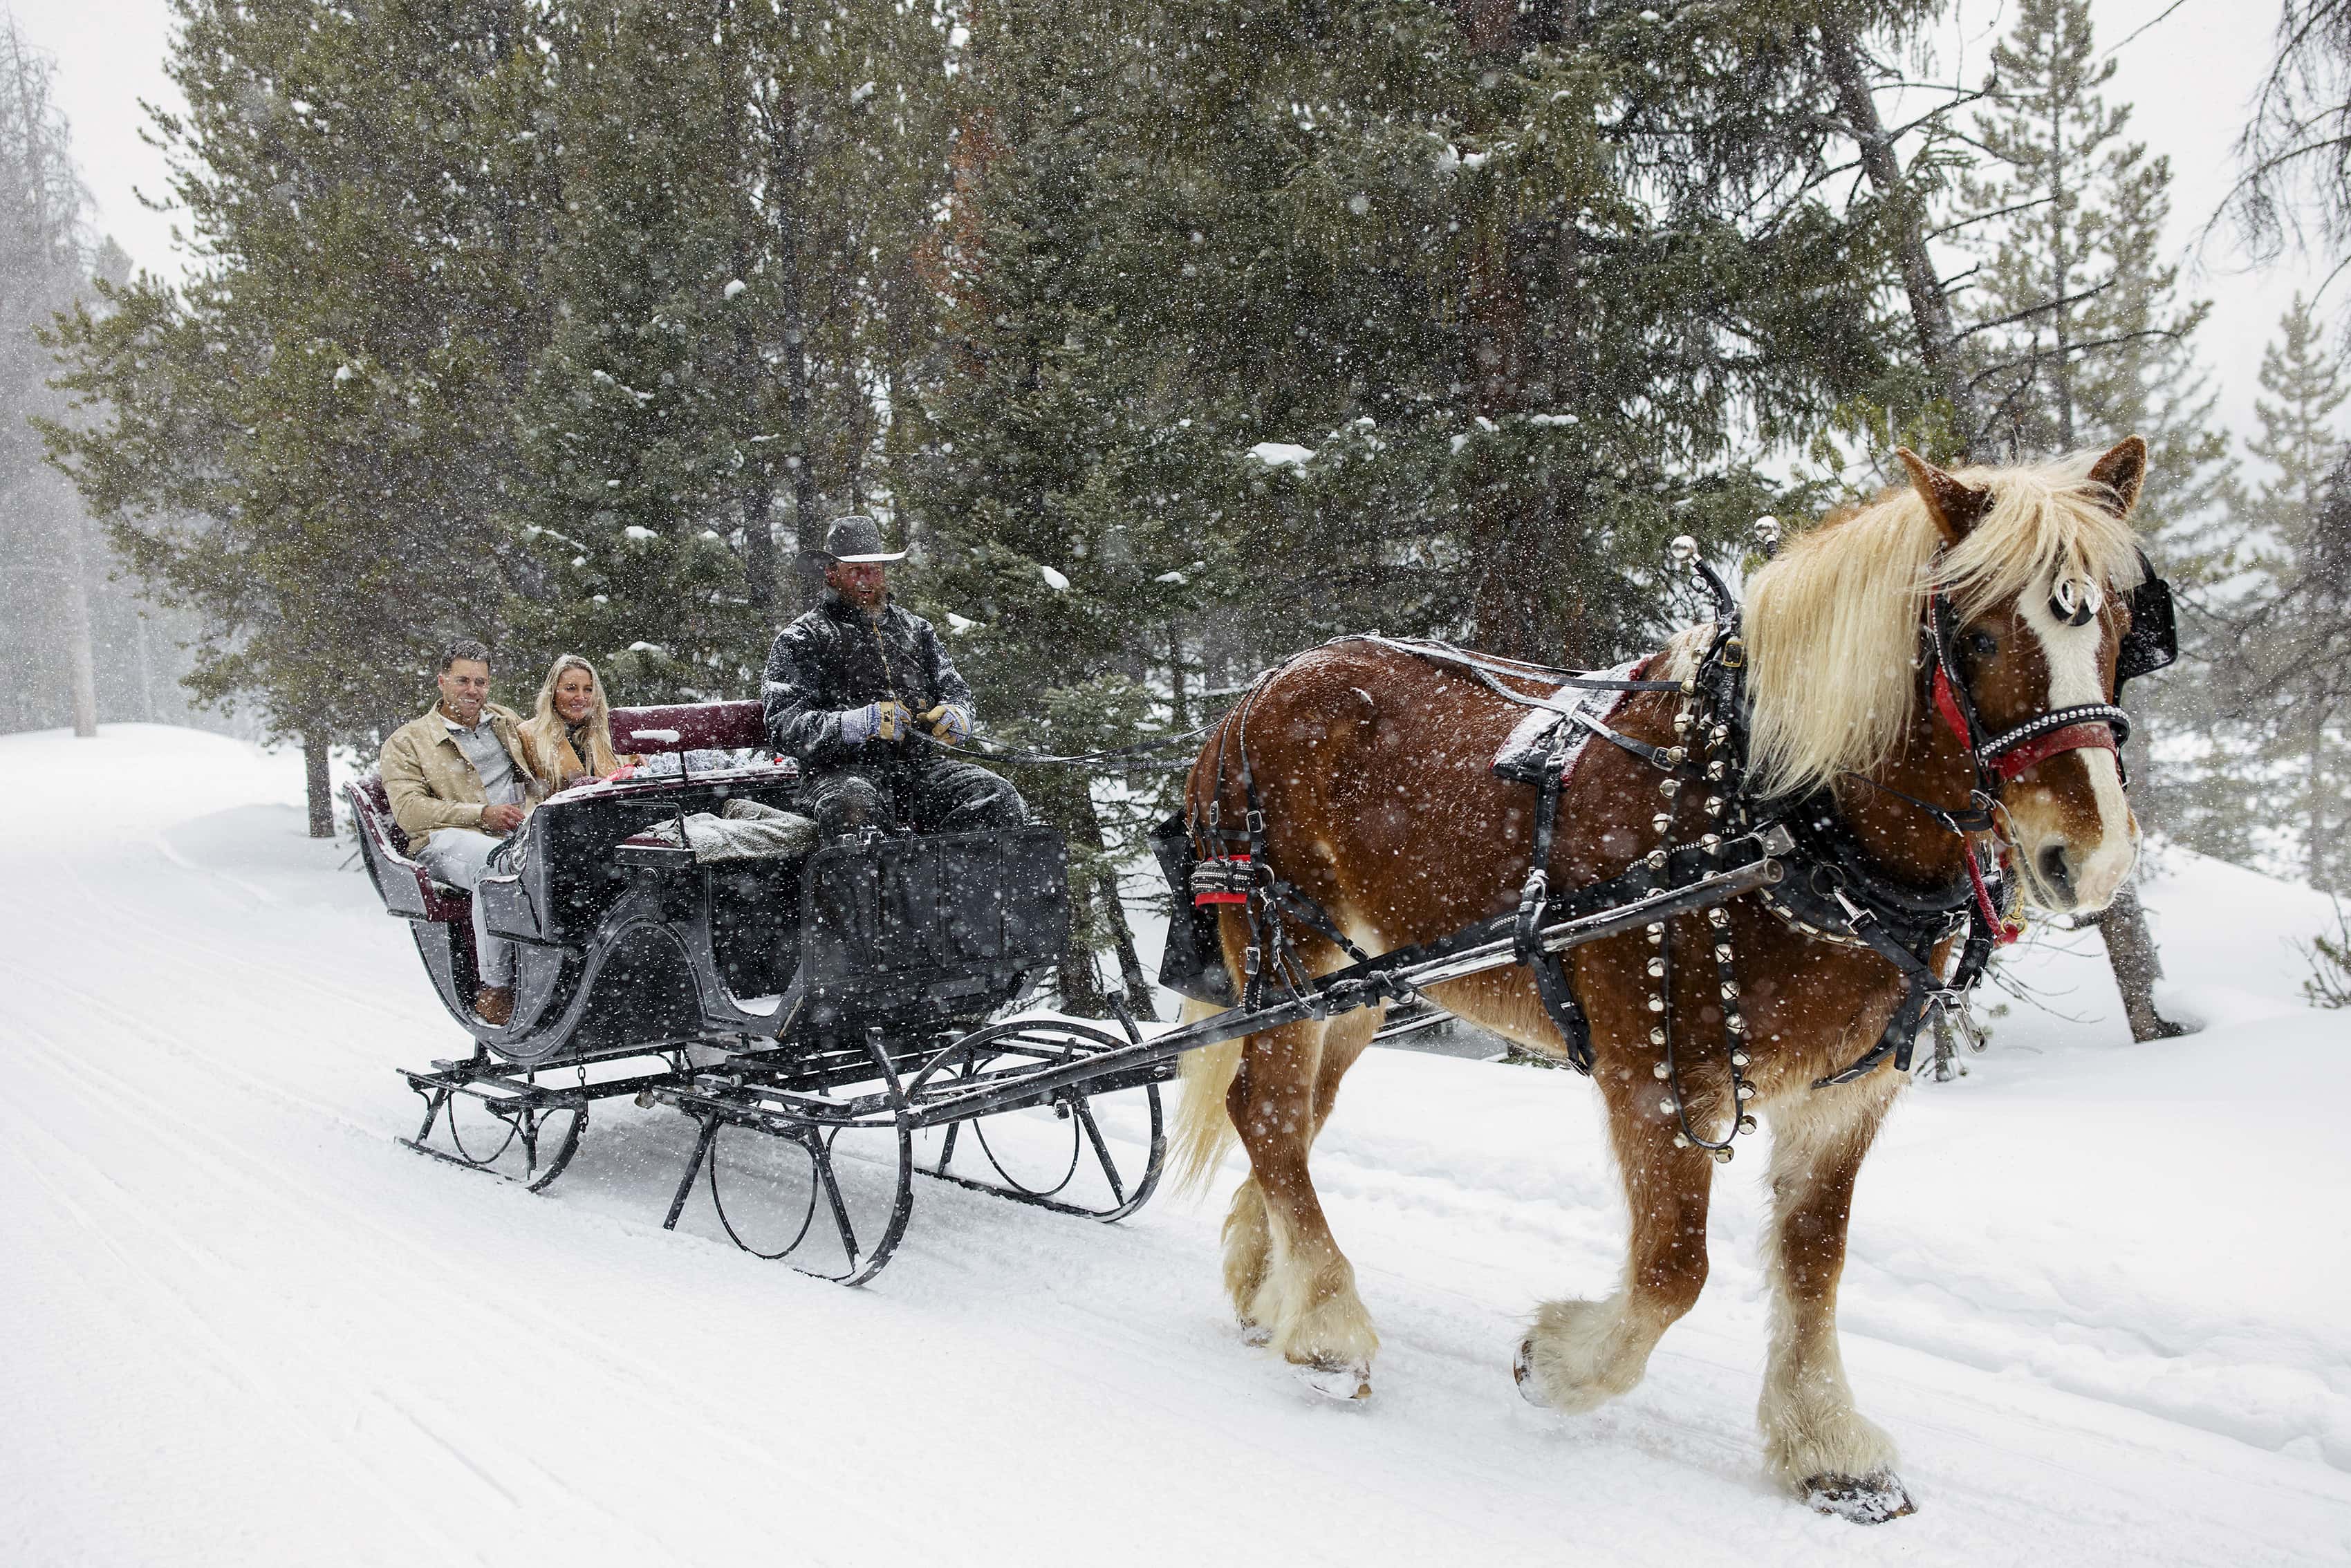 A newly engaged couple enjoys a sleigh ride in the snow in Breckenridge, Colorado